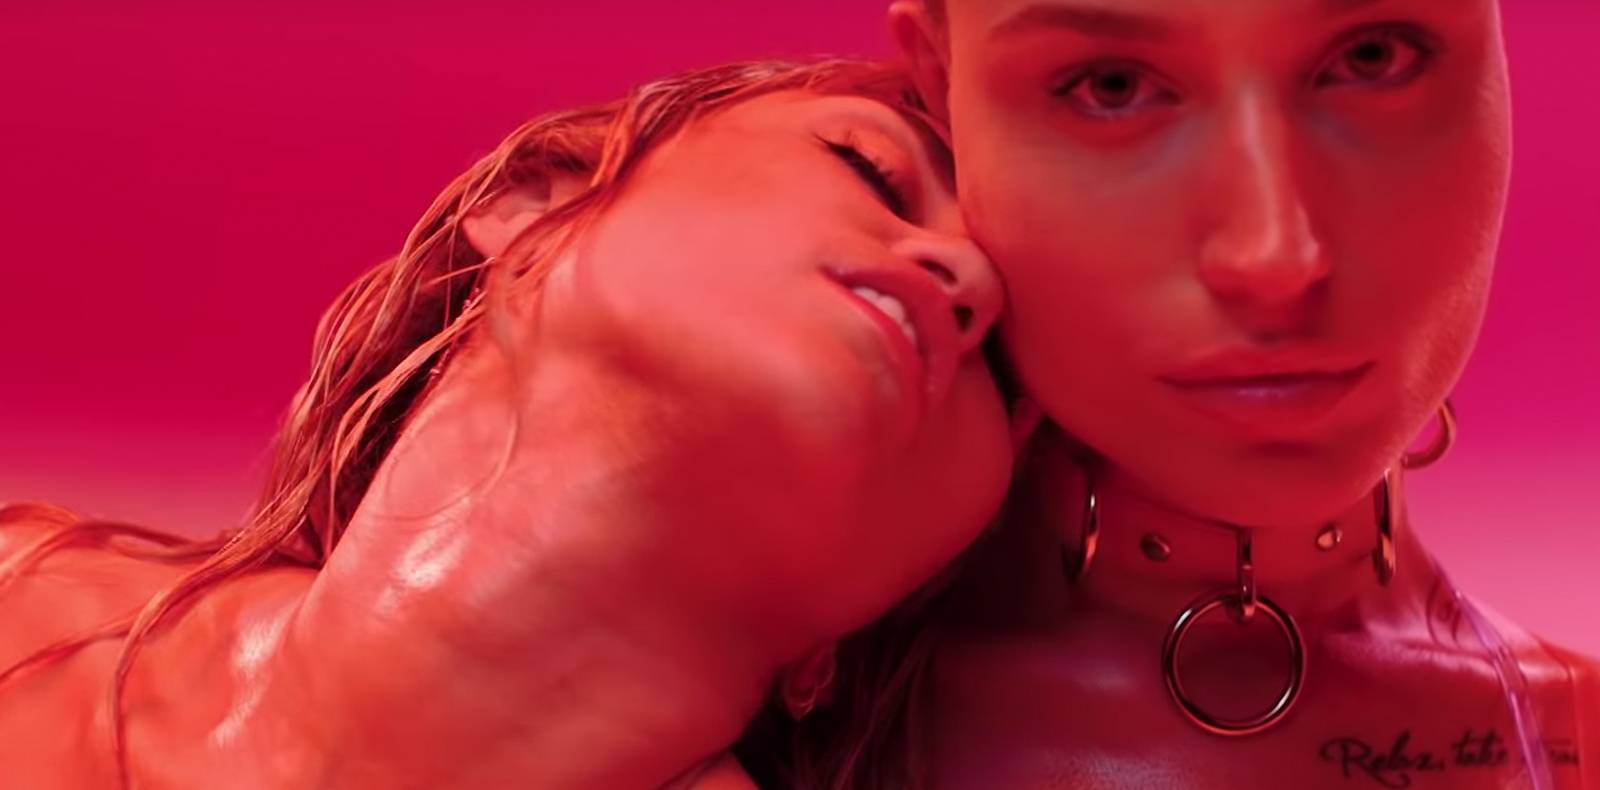 Miley Cyrus, wild feminist in “Mother’s Daughter”